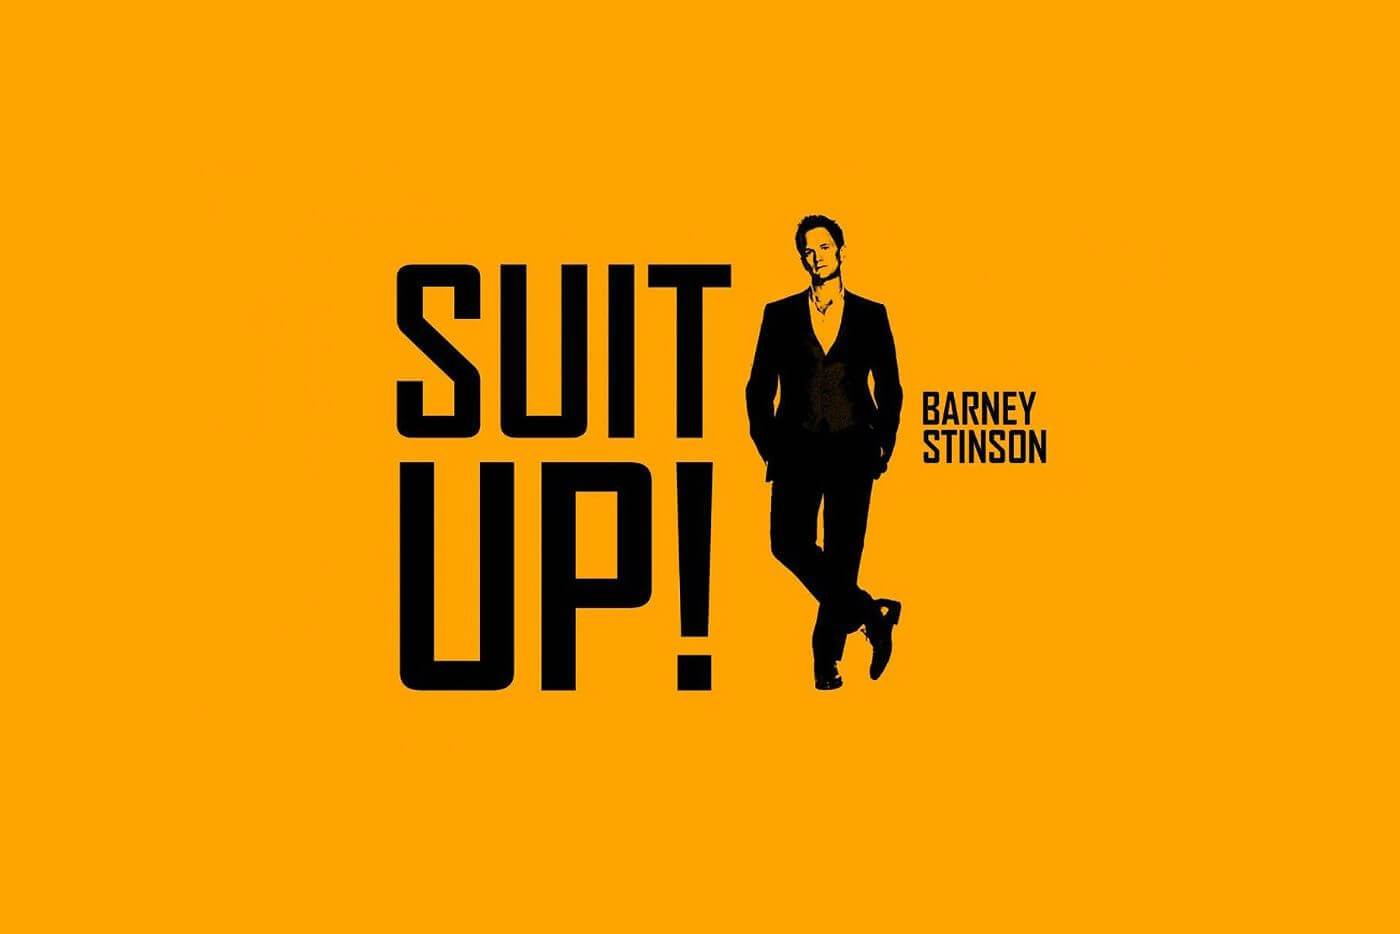 Neil Patrick Harris The Bro Code Barney Stinson How I Met Your M The  Playbook: Suit Up. Score Chicks. Be Awesome, how i met your m, television,  public Relations png | PNGEgg